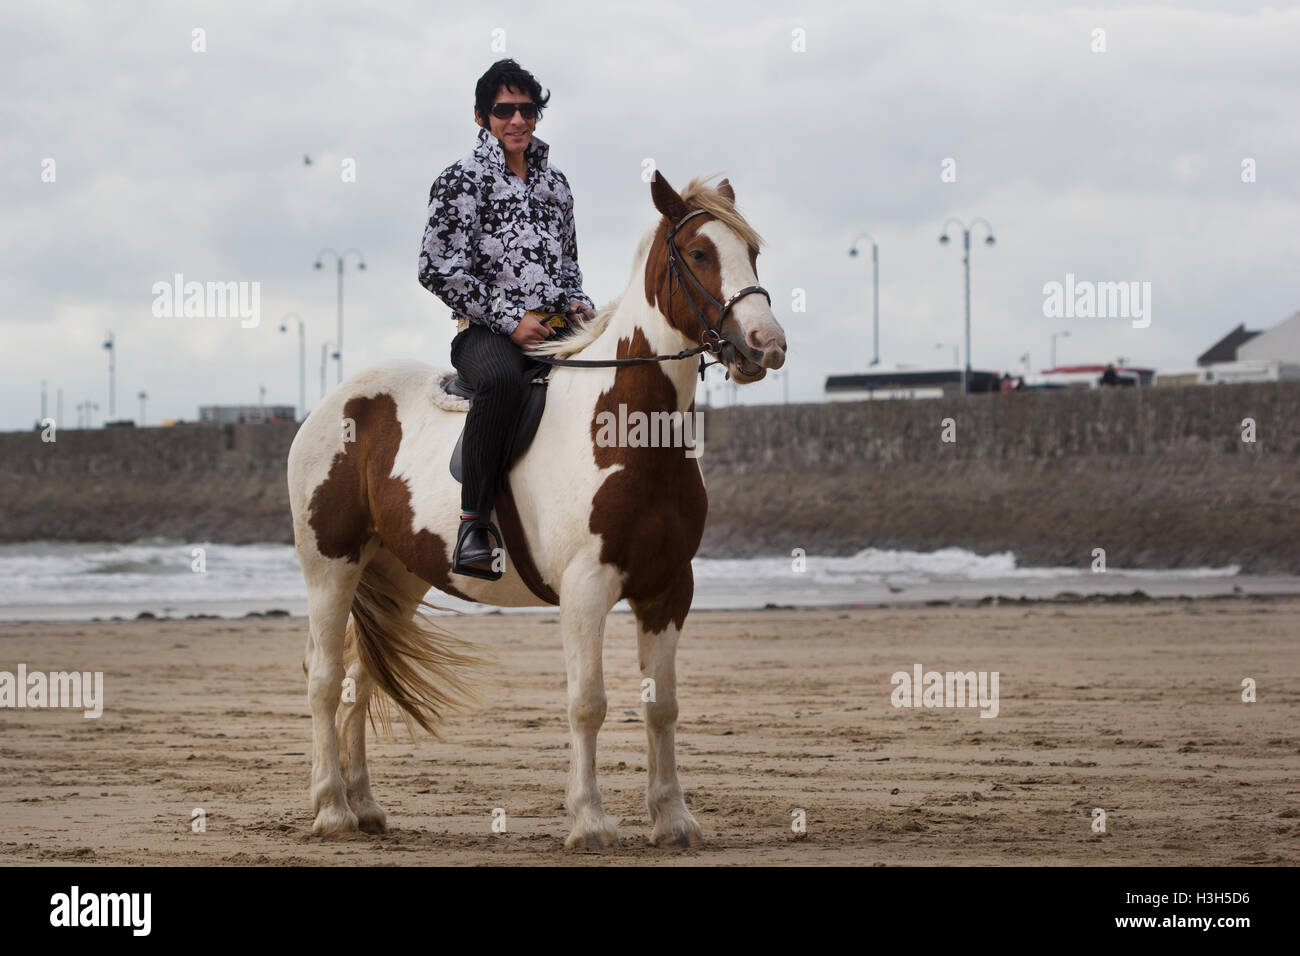 Porth Cawl, Wales. 24th Sept, 2016. A man dressed as Elvis sits on a horse on the beach. ©AimeeHerd Freelance Stock Photo